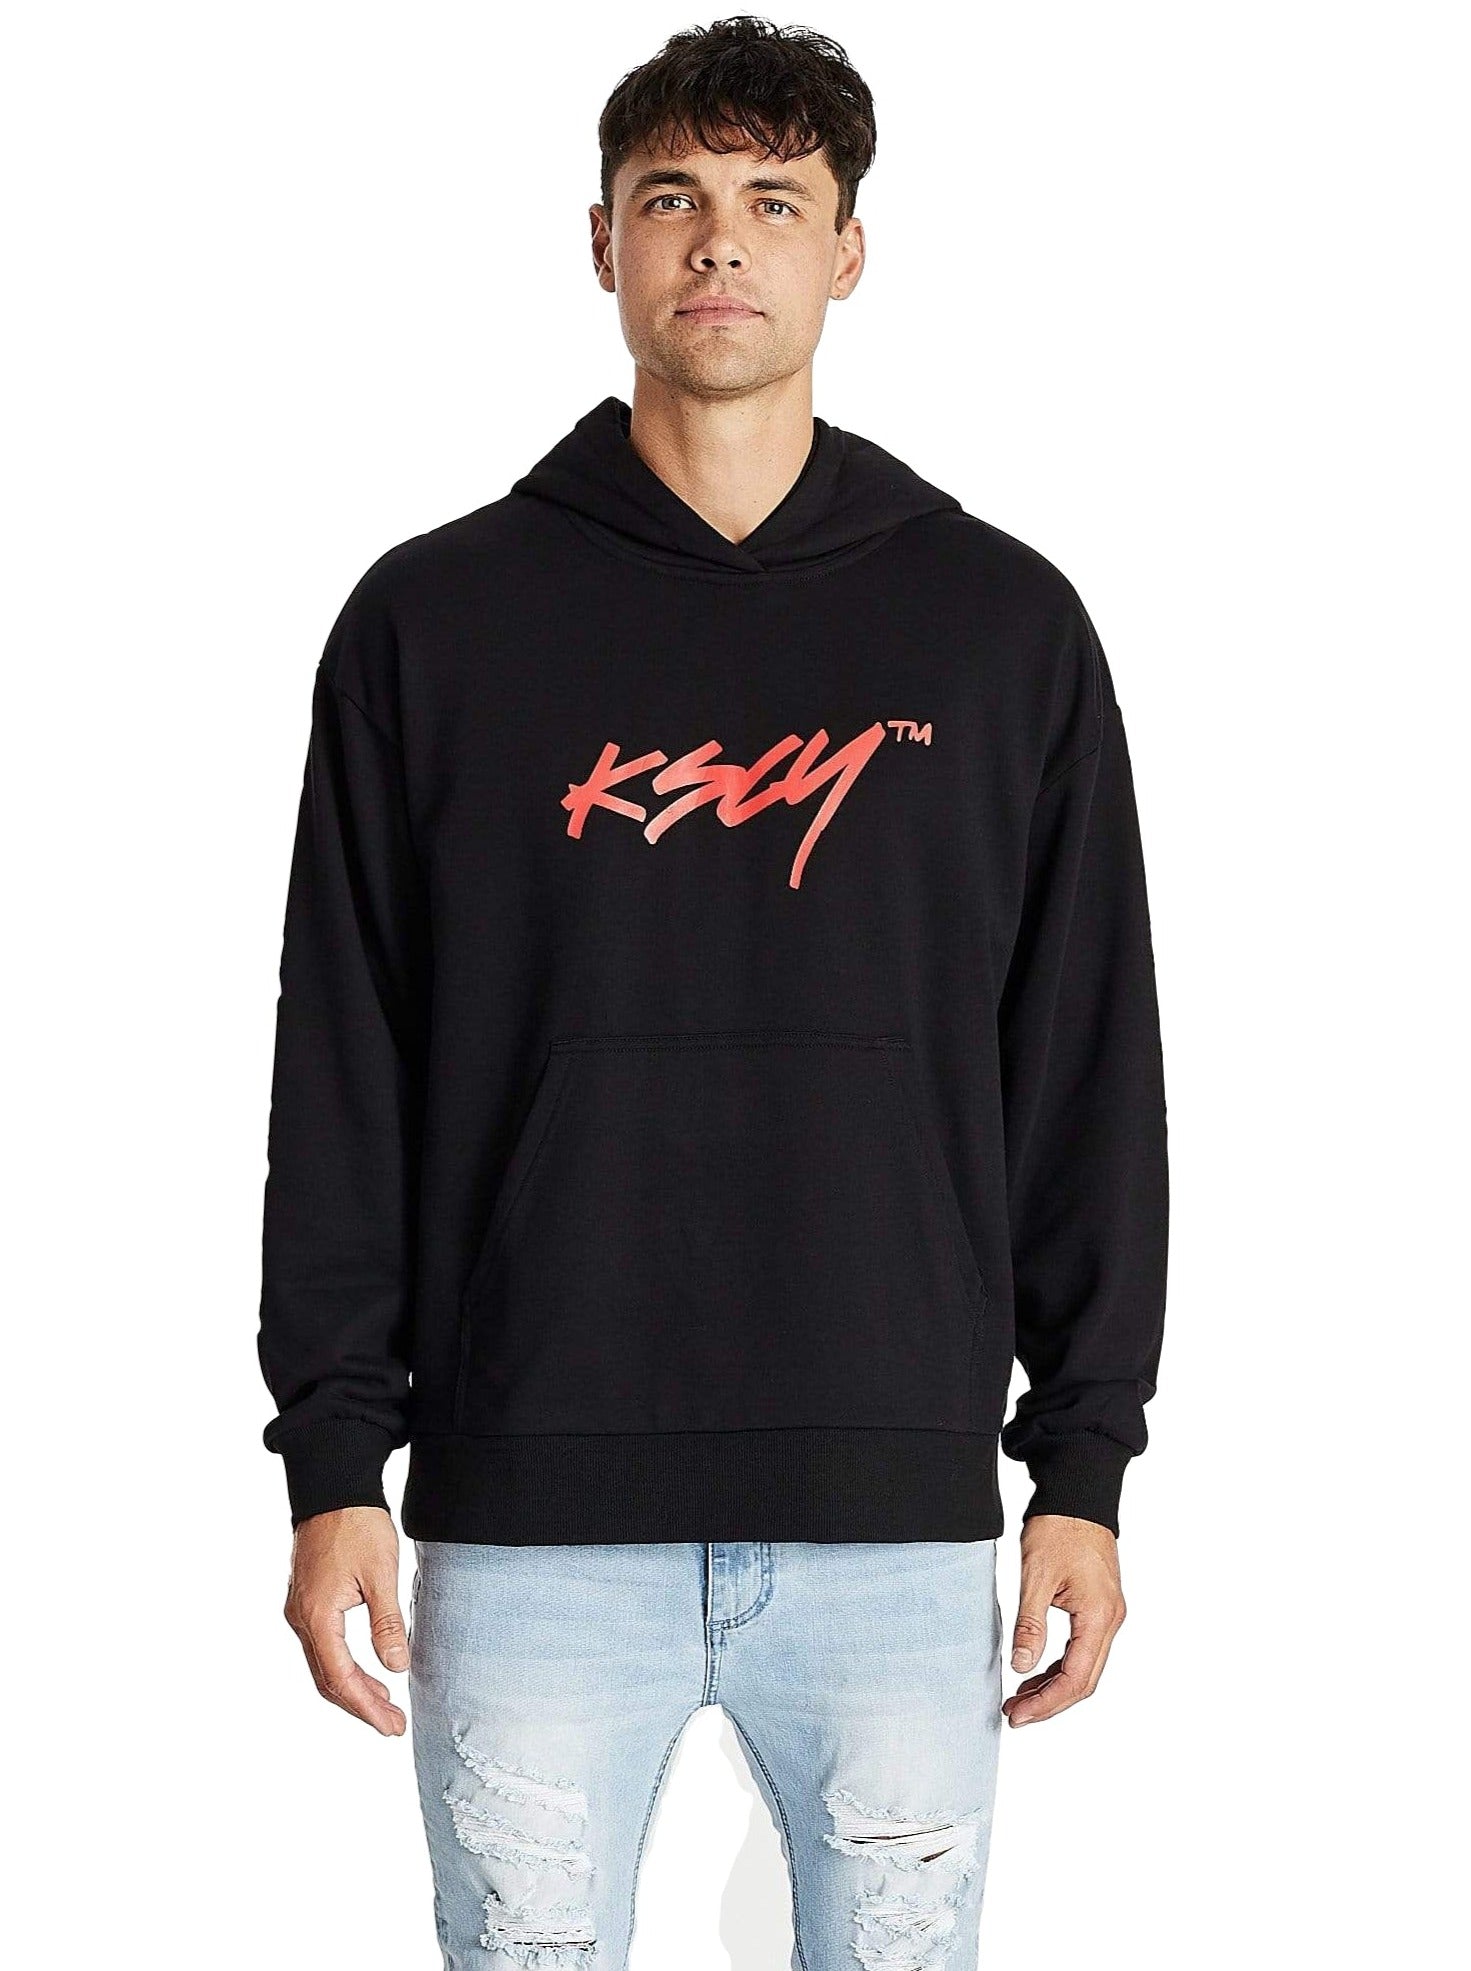 Kiss Chacey - Storm Relaxed Hooded Sweater - Jet Black